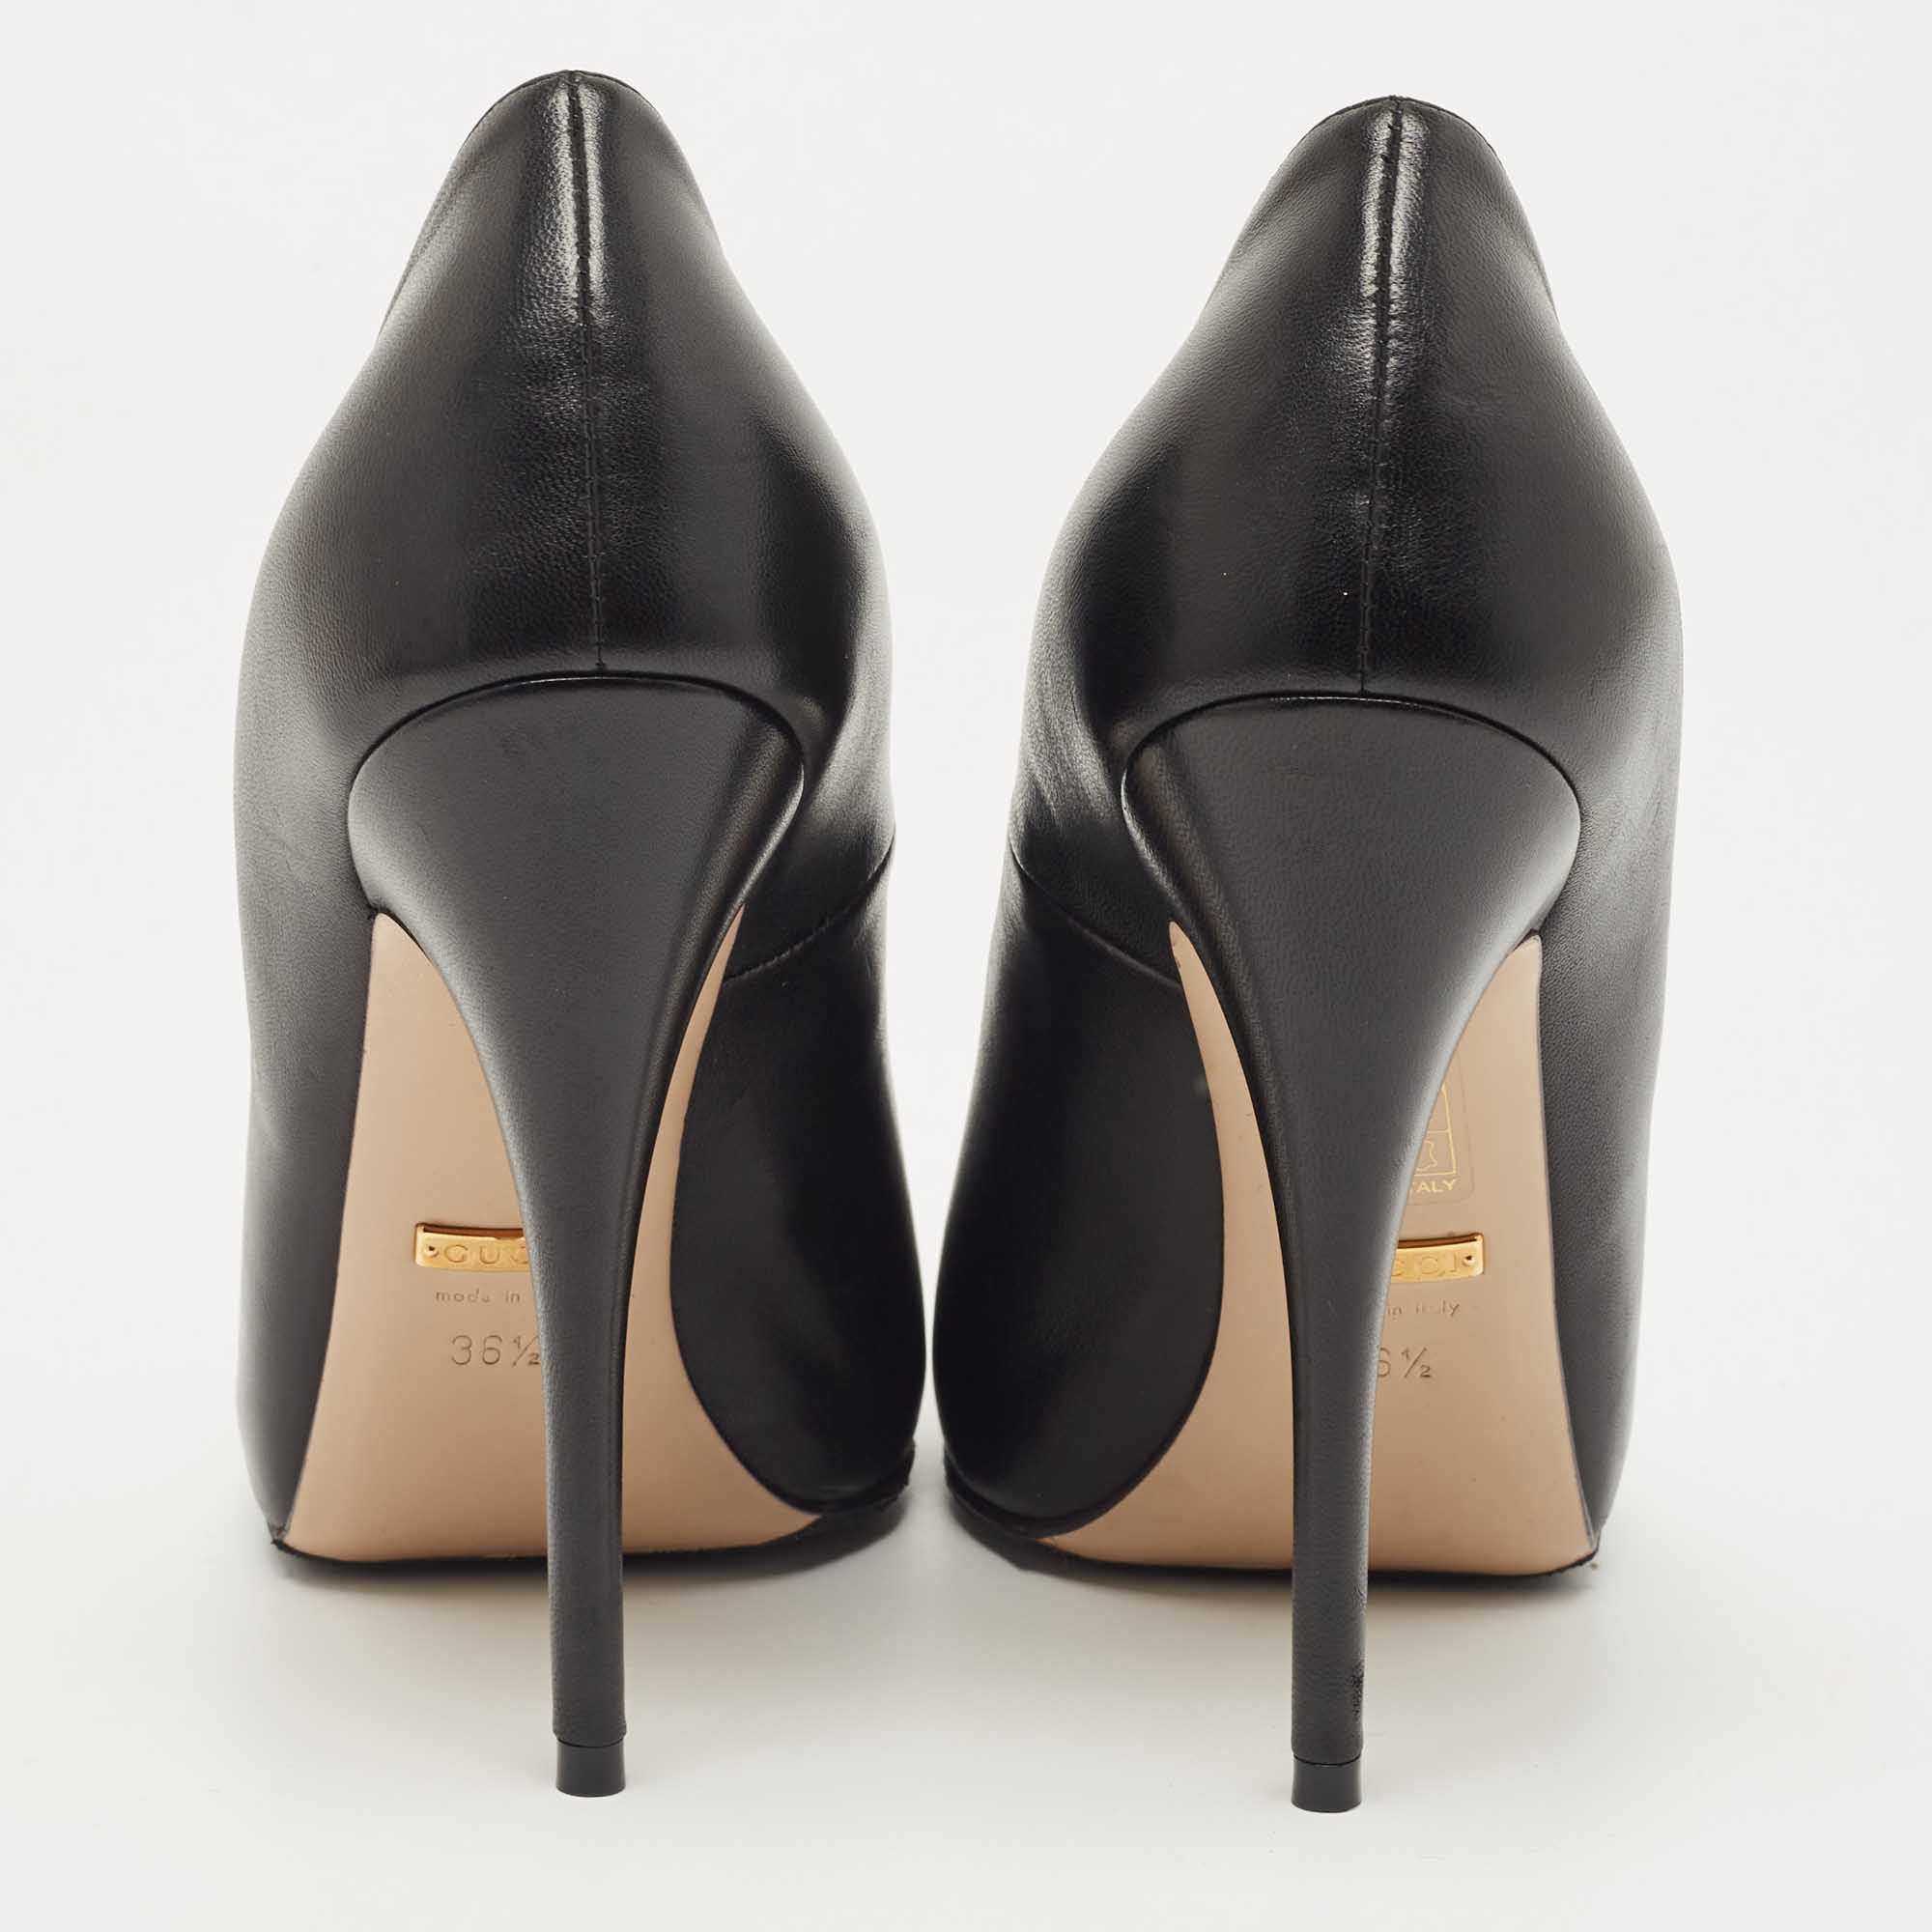 Gucci Black Leather Pointed Toe Pumps Size 36.5